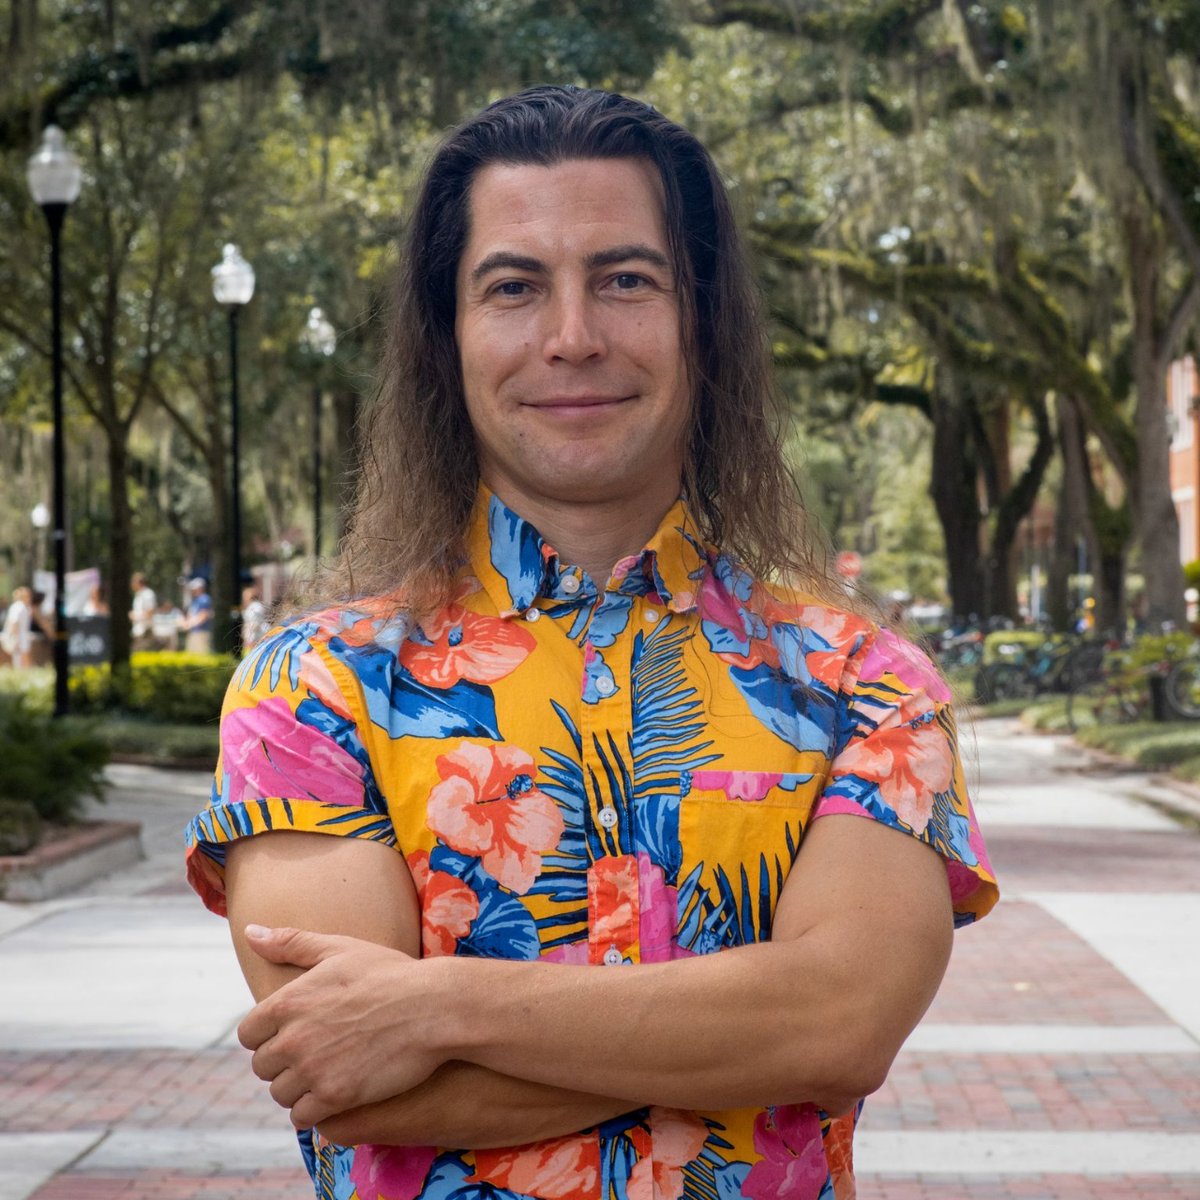 Affiliate #facultyfriday: Anton Matytsin is Associate Professor in @UfHistory. His research focuses on intellectual & cultural history of early modern Europe, focusing on 17th & 18th century France. Learn more at ces.ufl.edu/directory/anto…